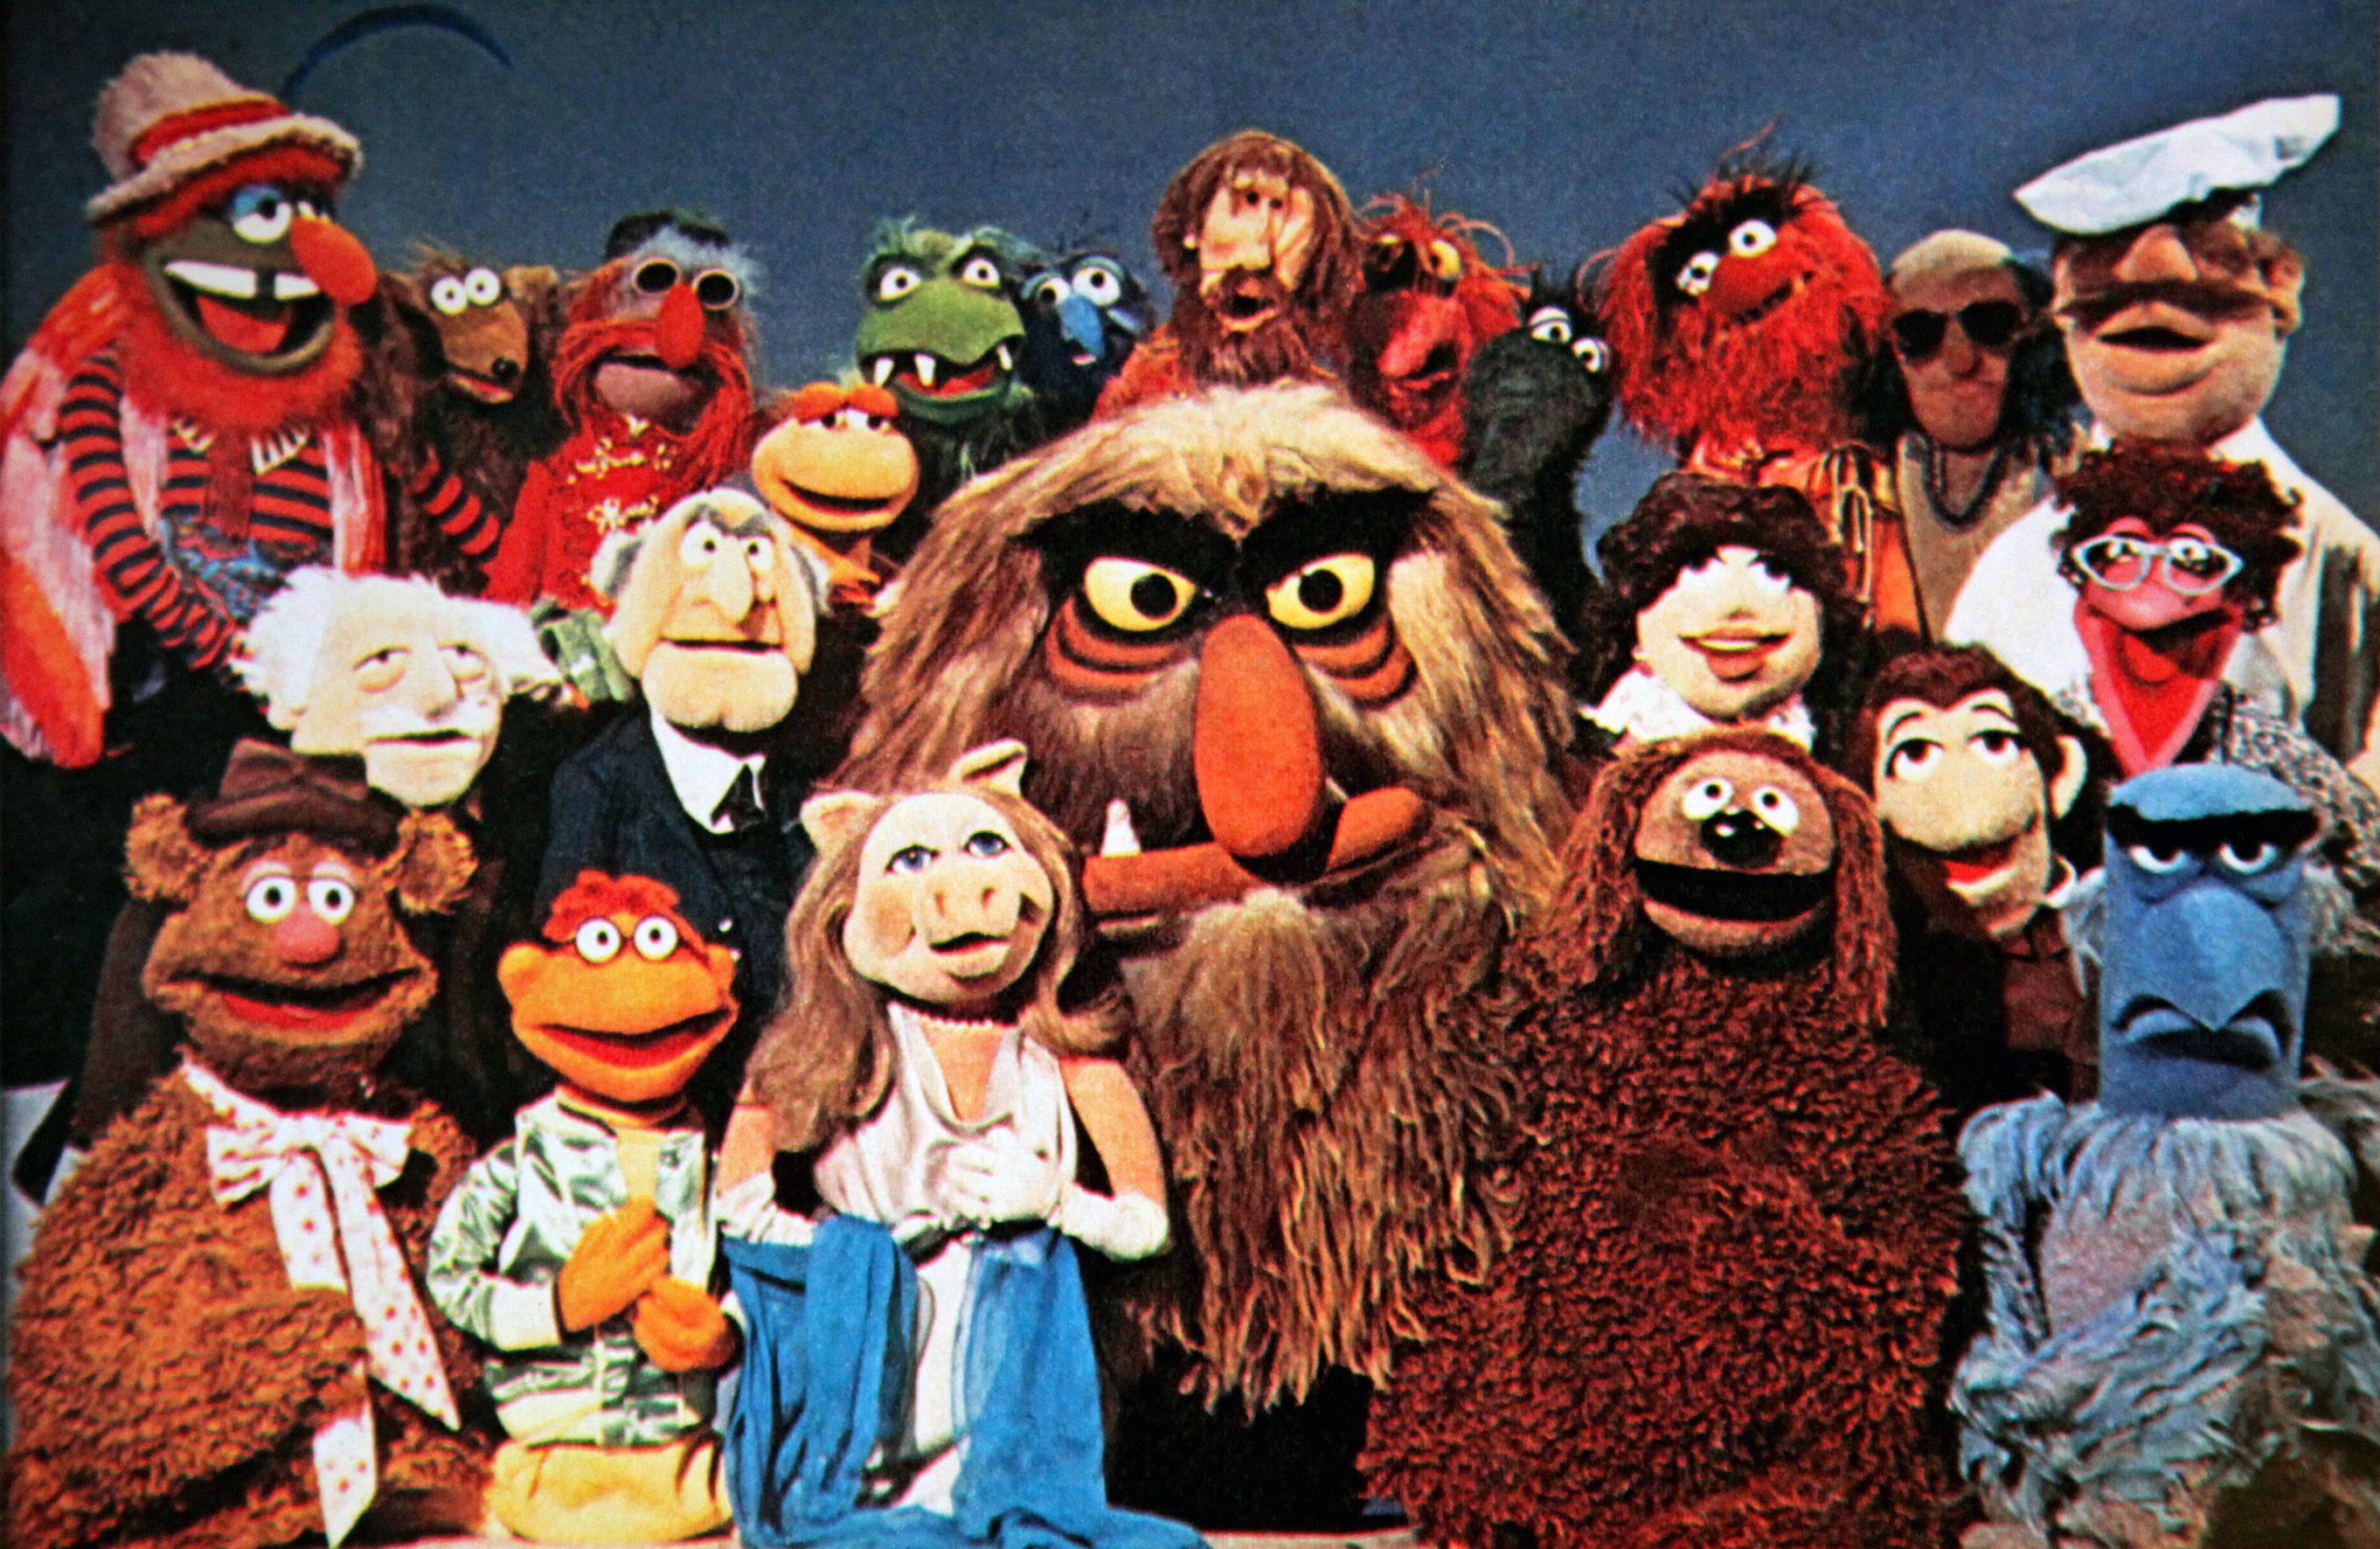 Amazing The Muppet Show Pictures & Backgrounds